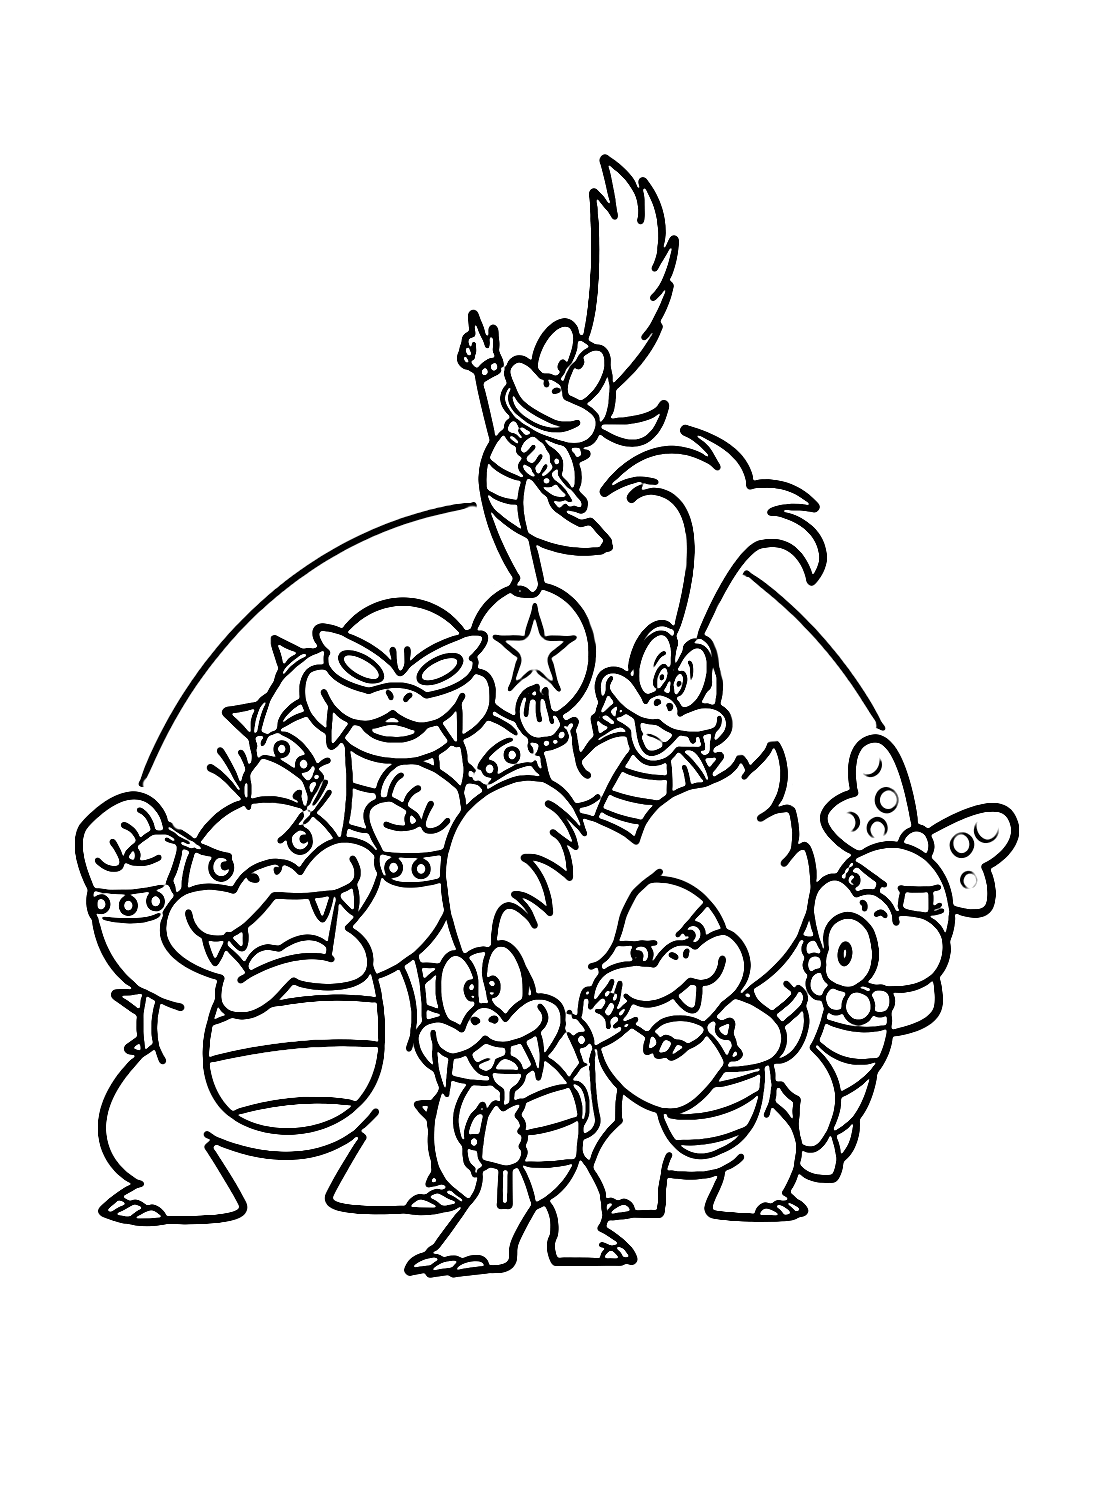 Images Koopalings Coloring Pages